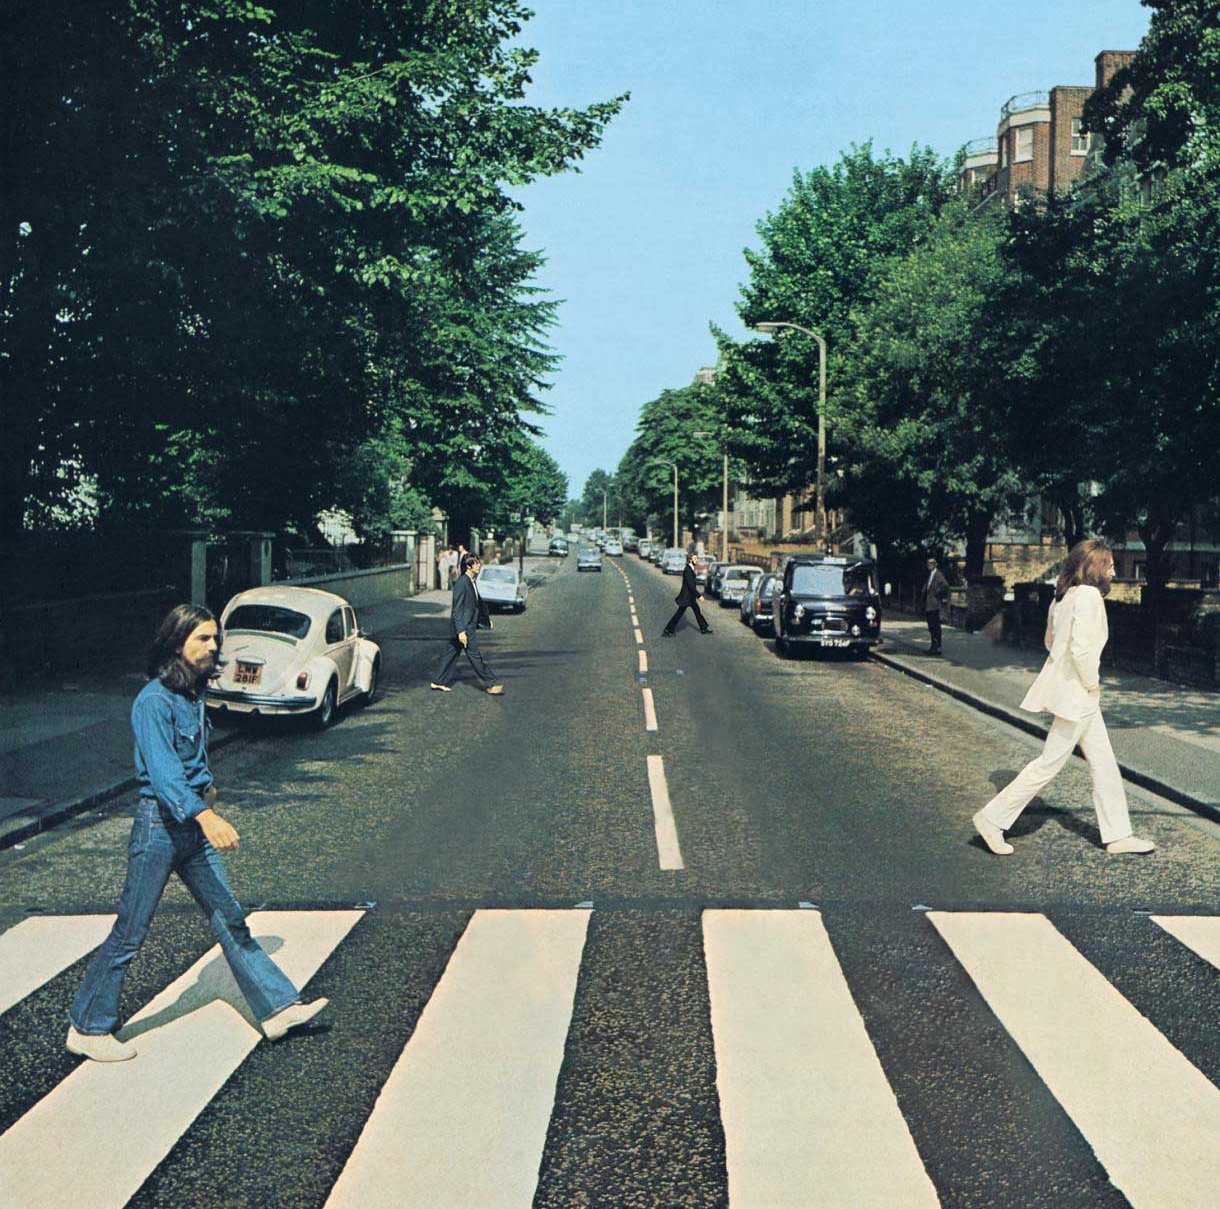 These ‘socially distanced’ classic album covers are very cleverly done and make their point perfectly